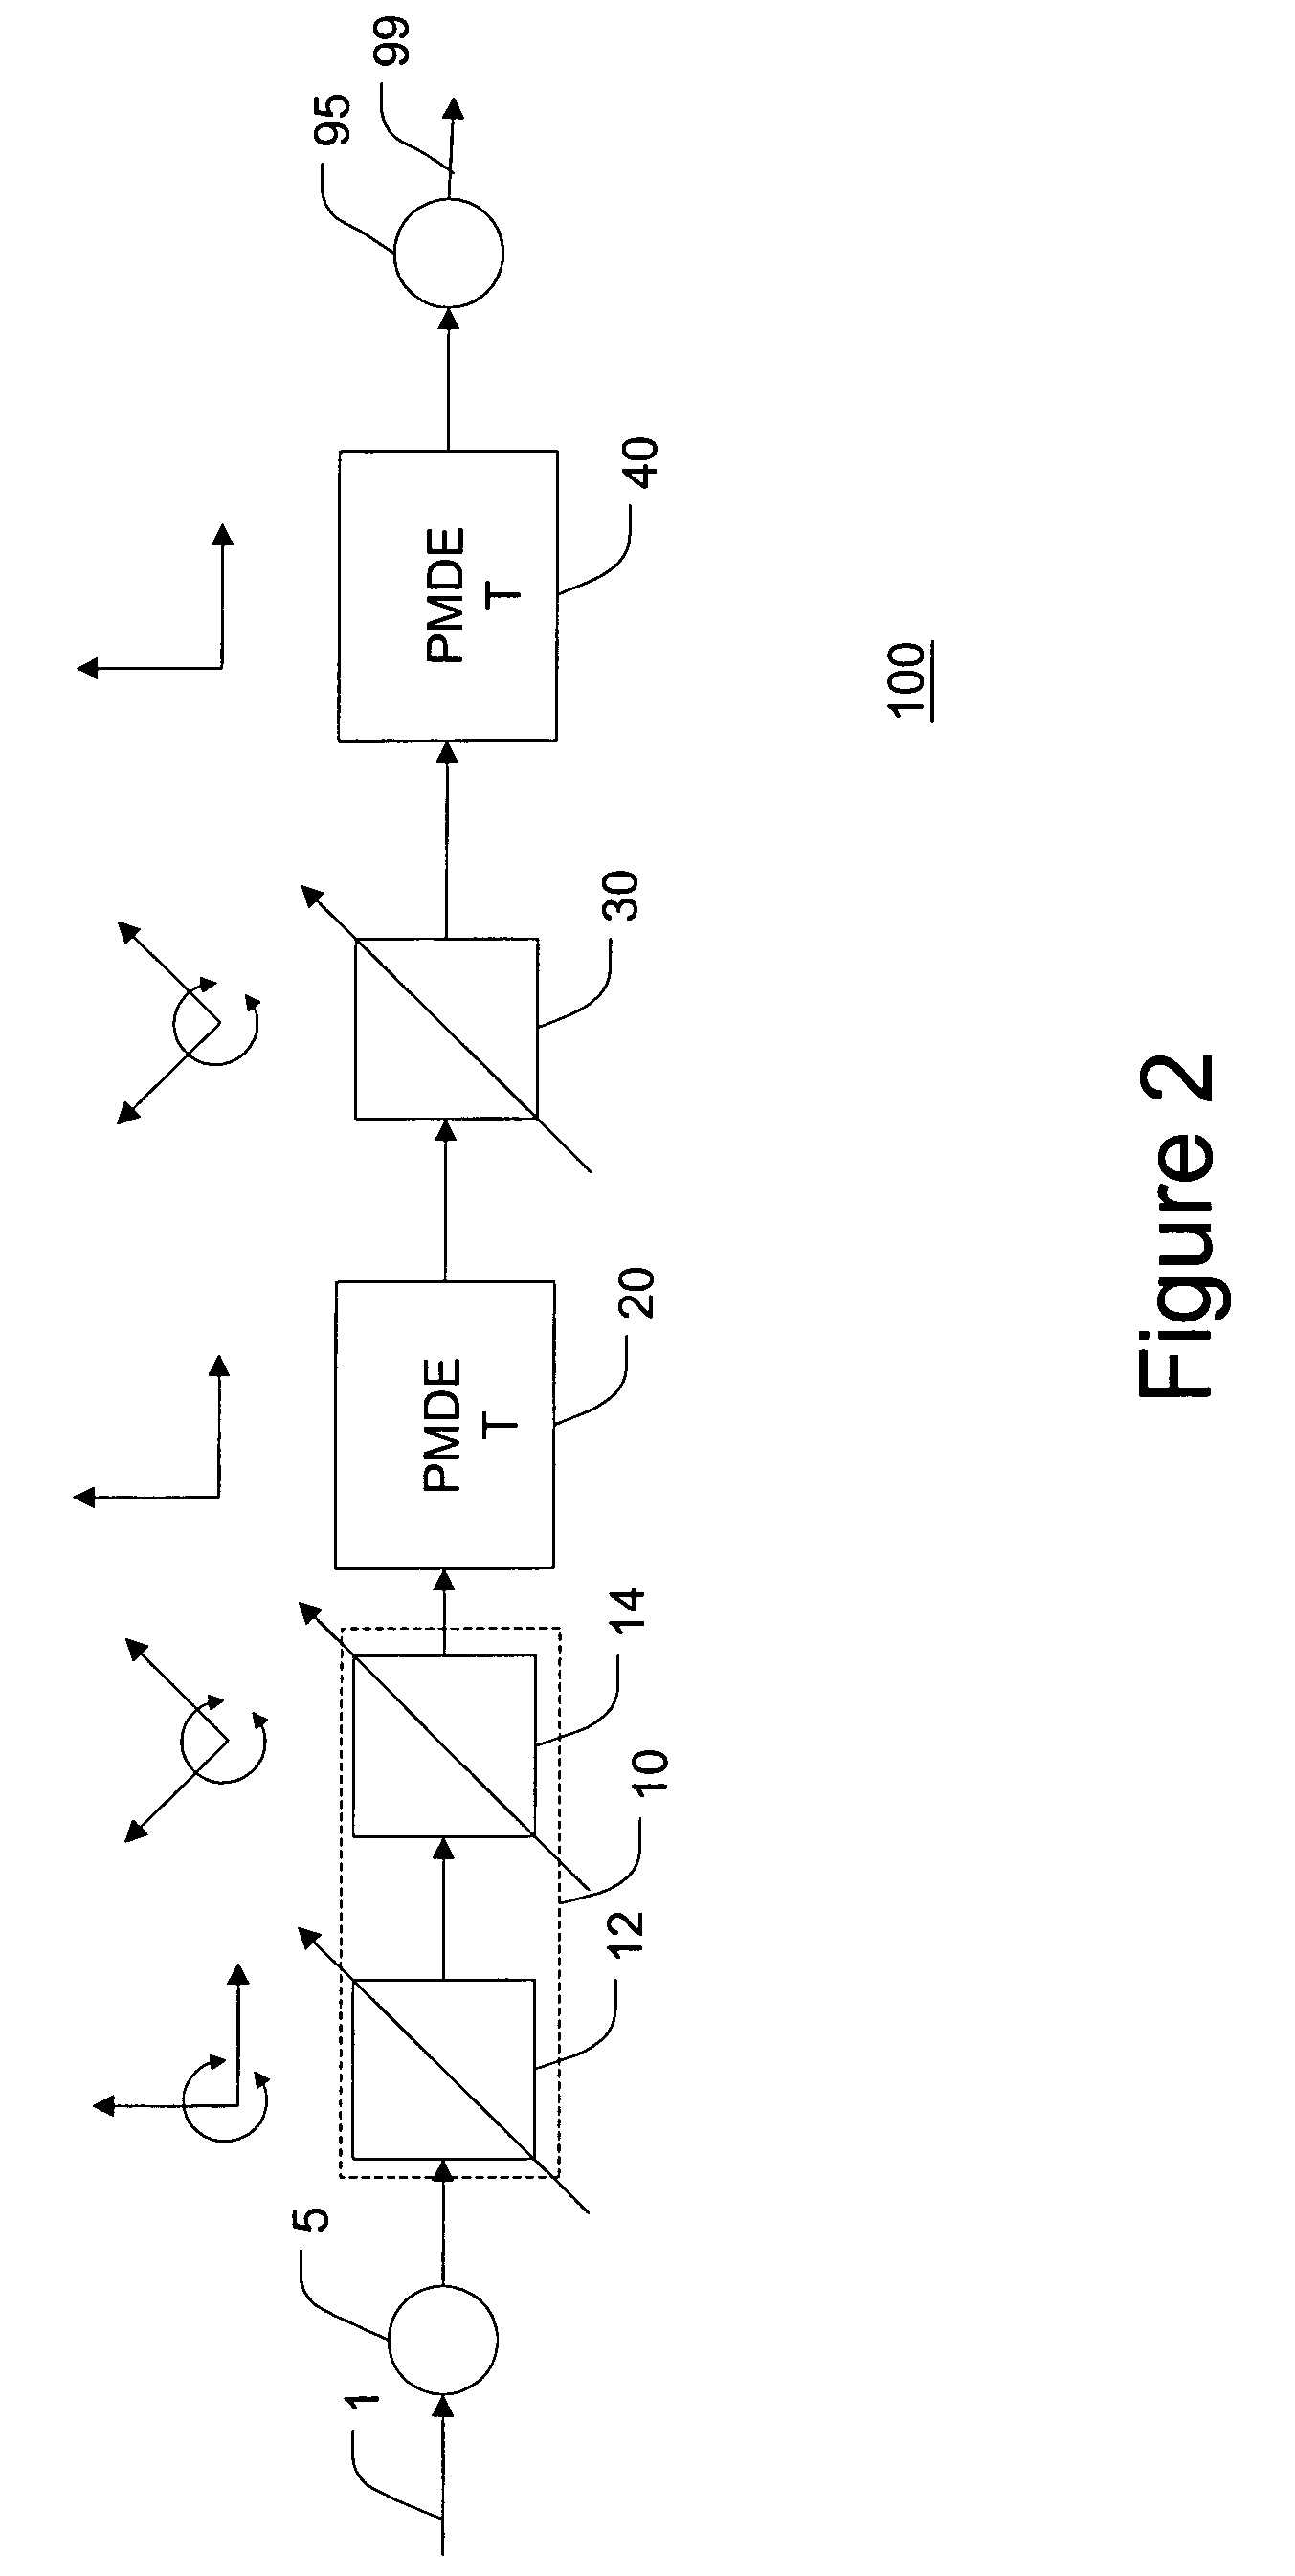 Polarization mode dispersion compensating apparatus, system, and method